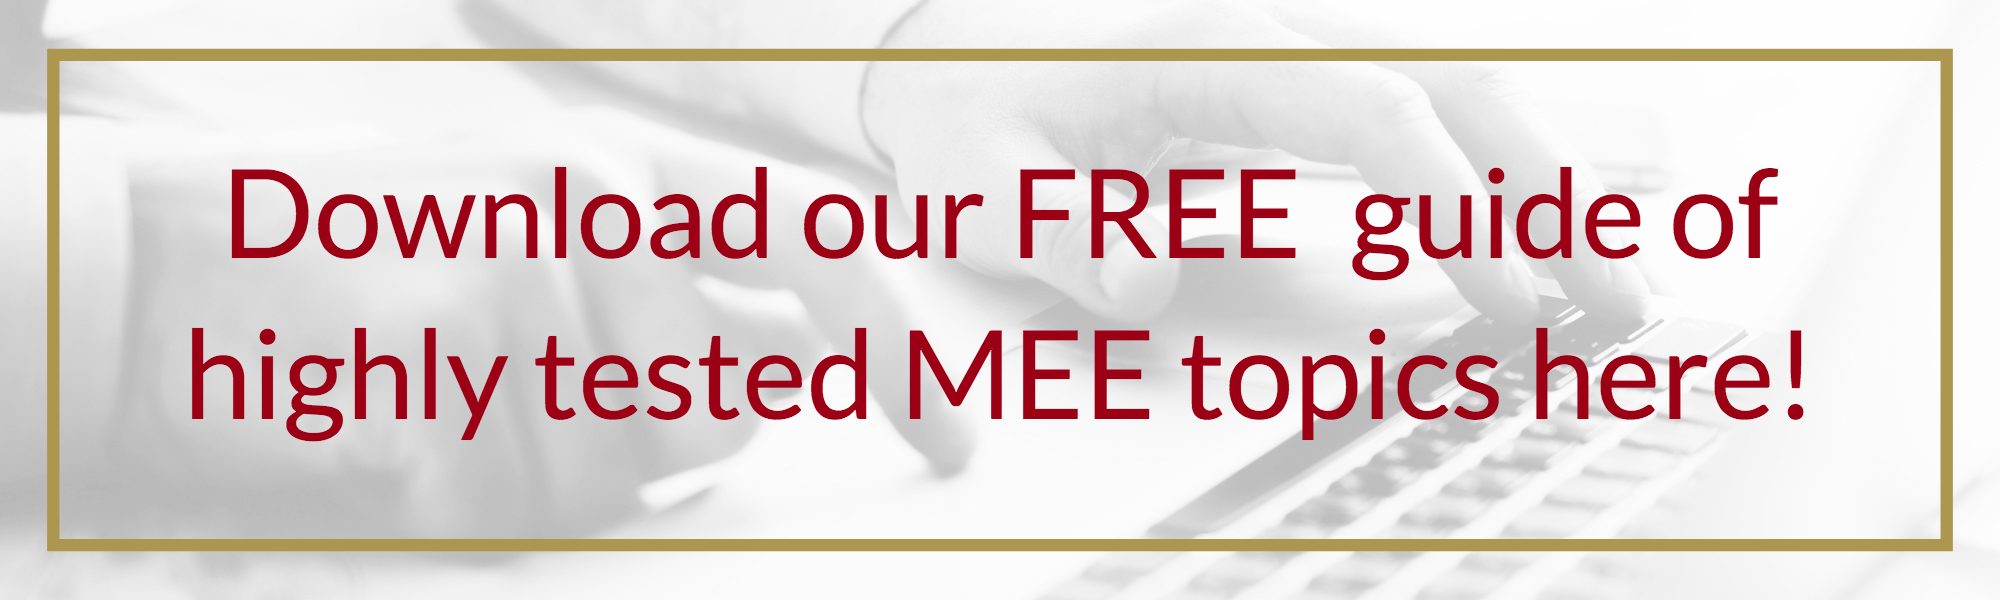 mee guide, highly tested mee topics